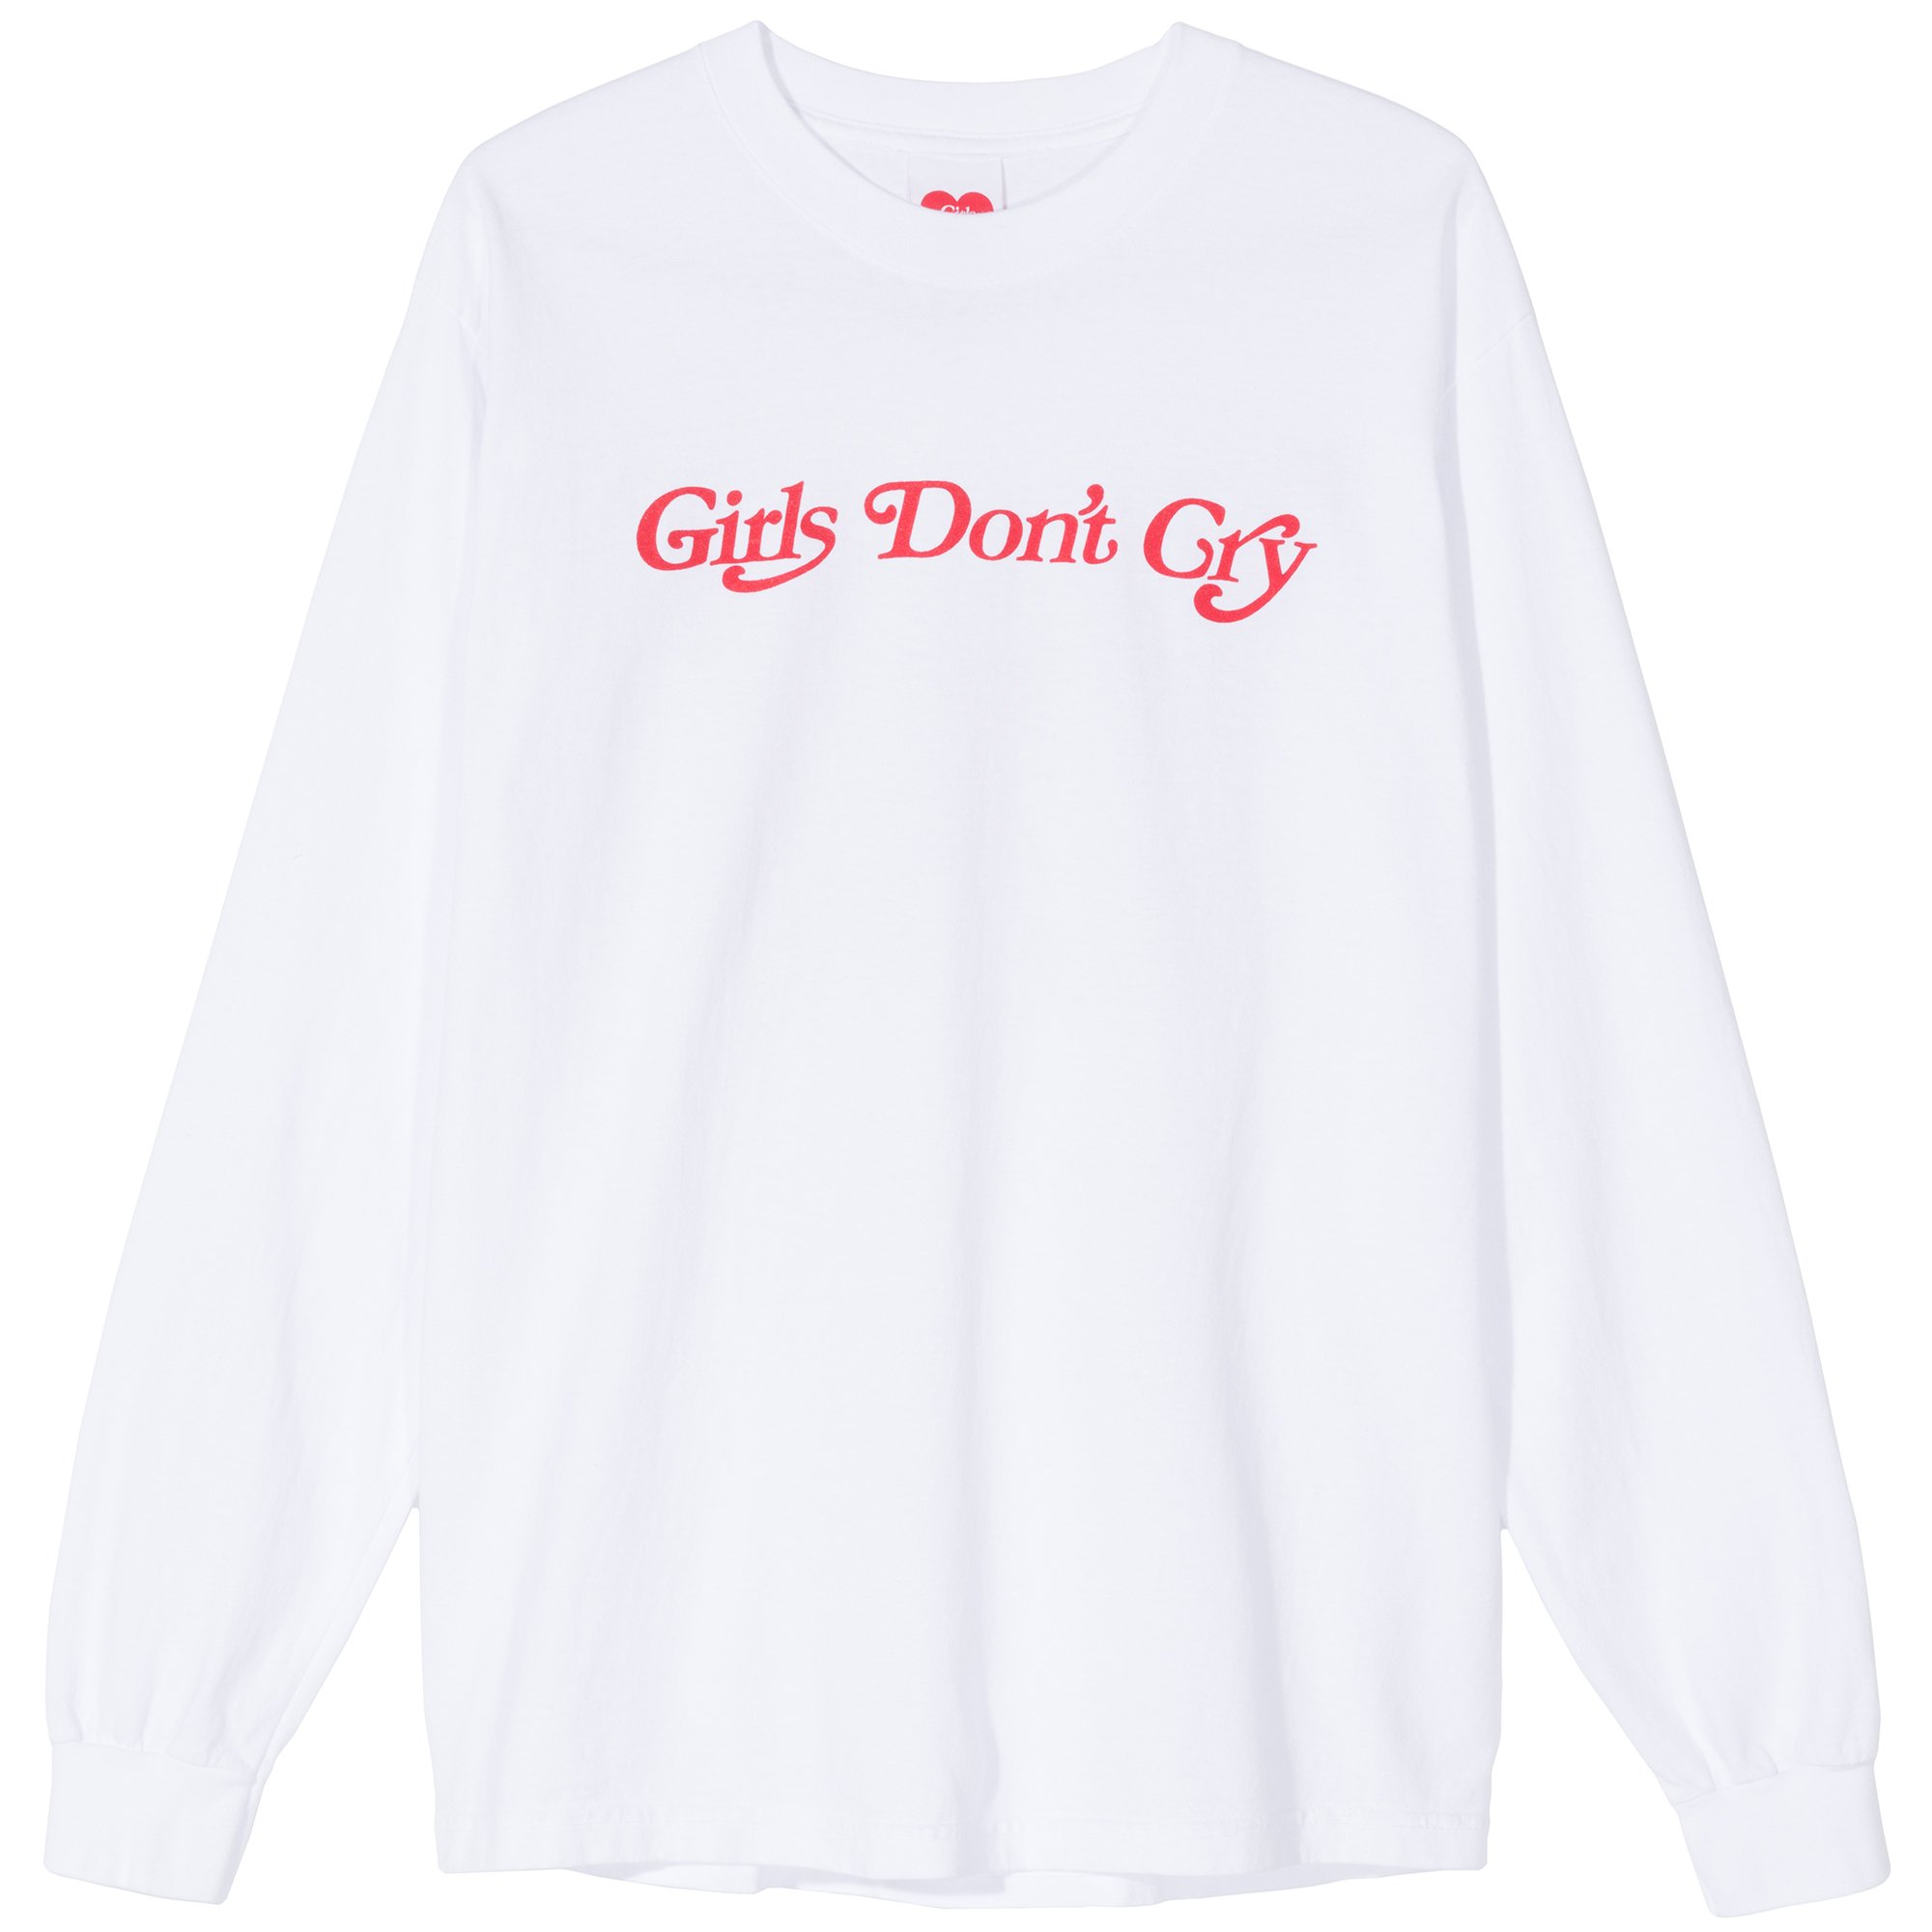 Girl's Don't Cry Butterfly Hoody size M - パーカー